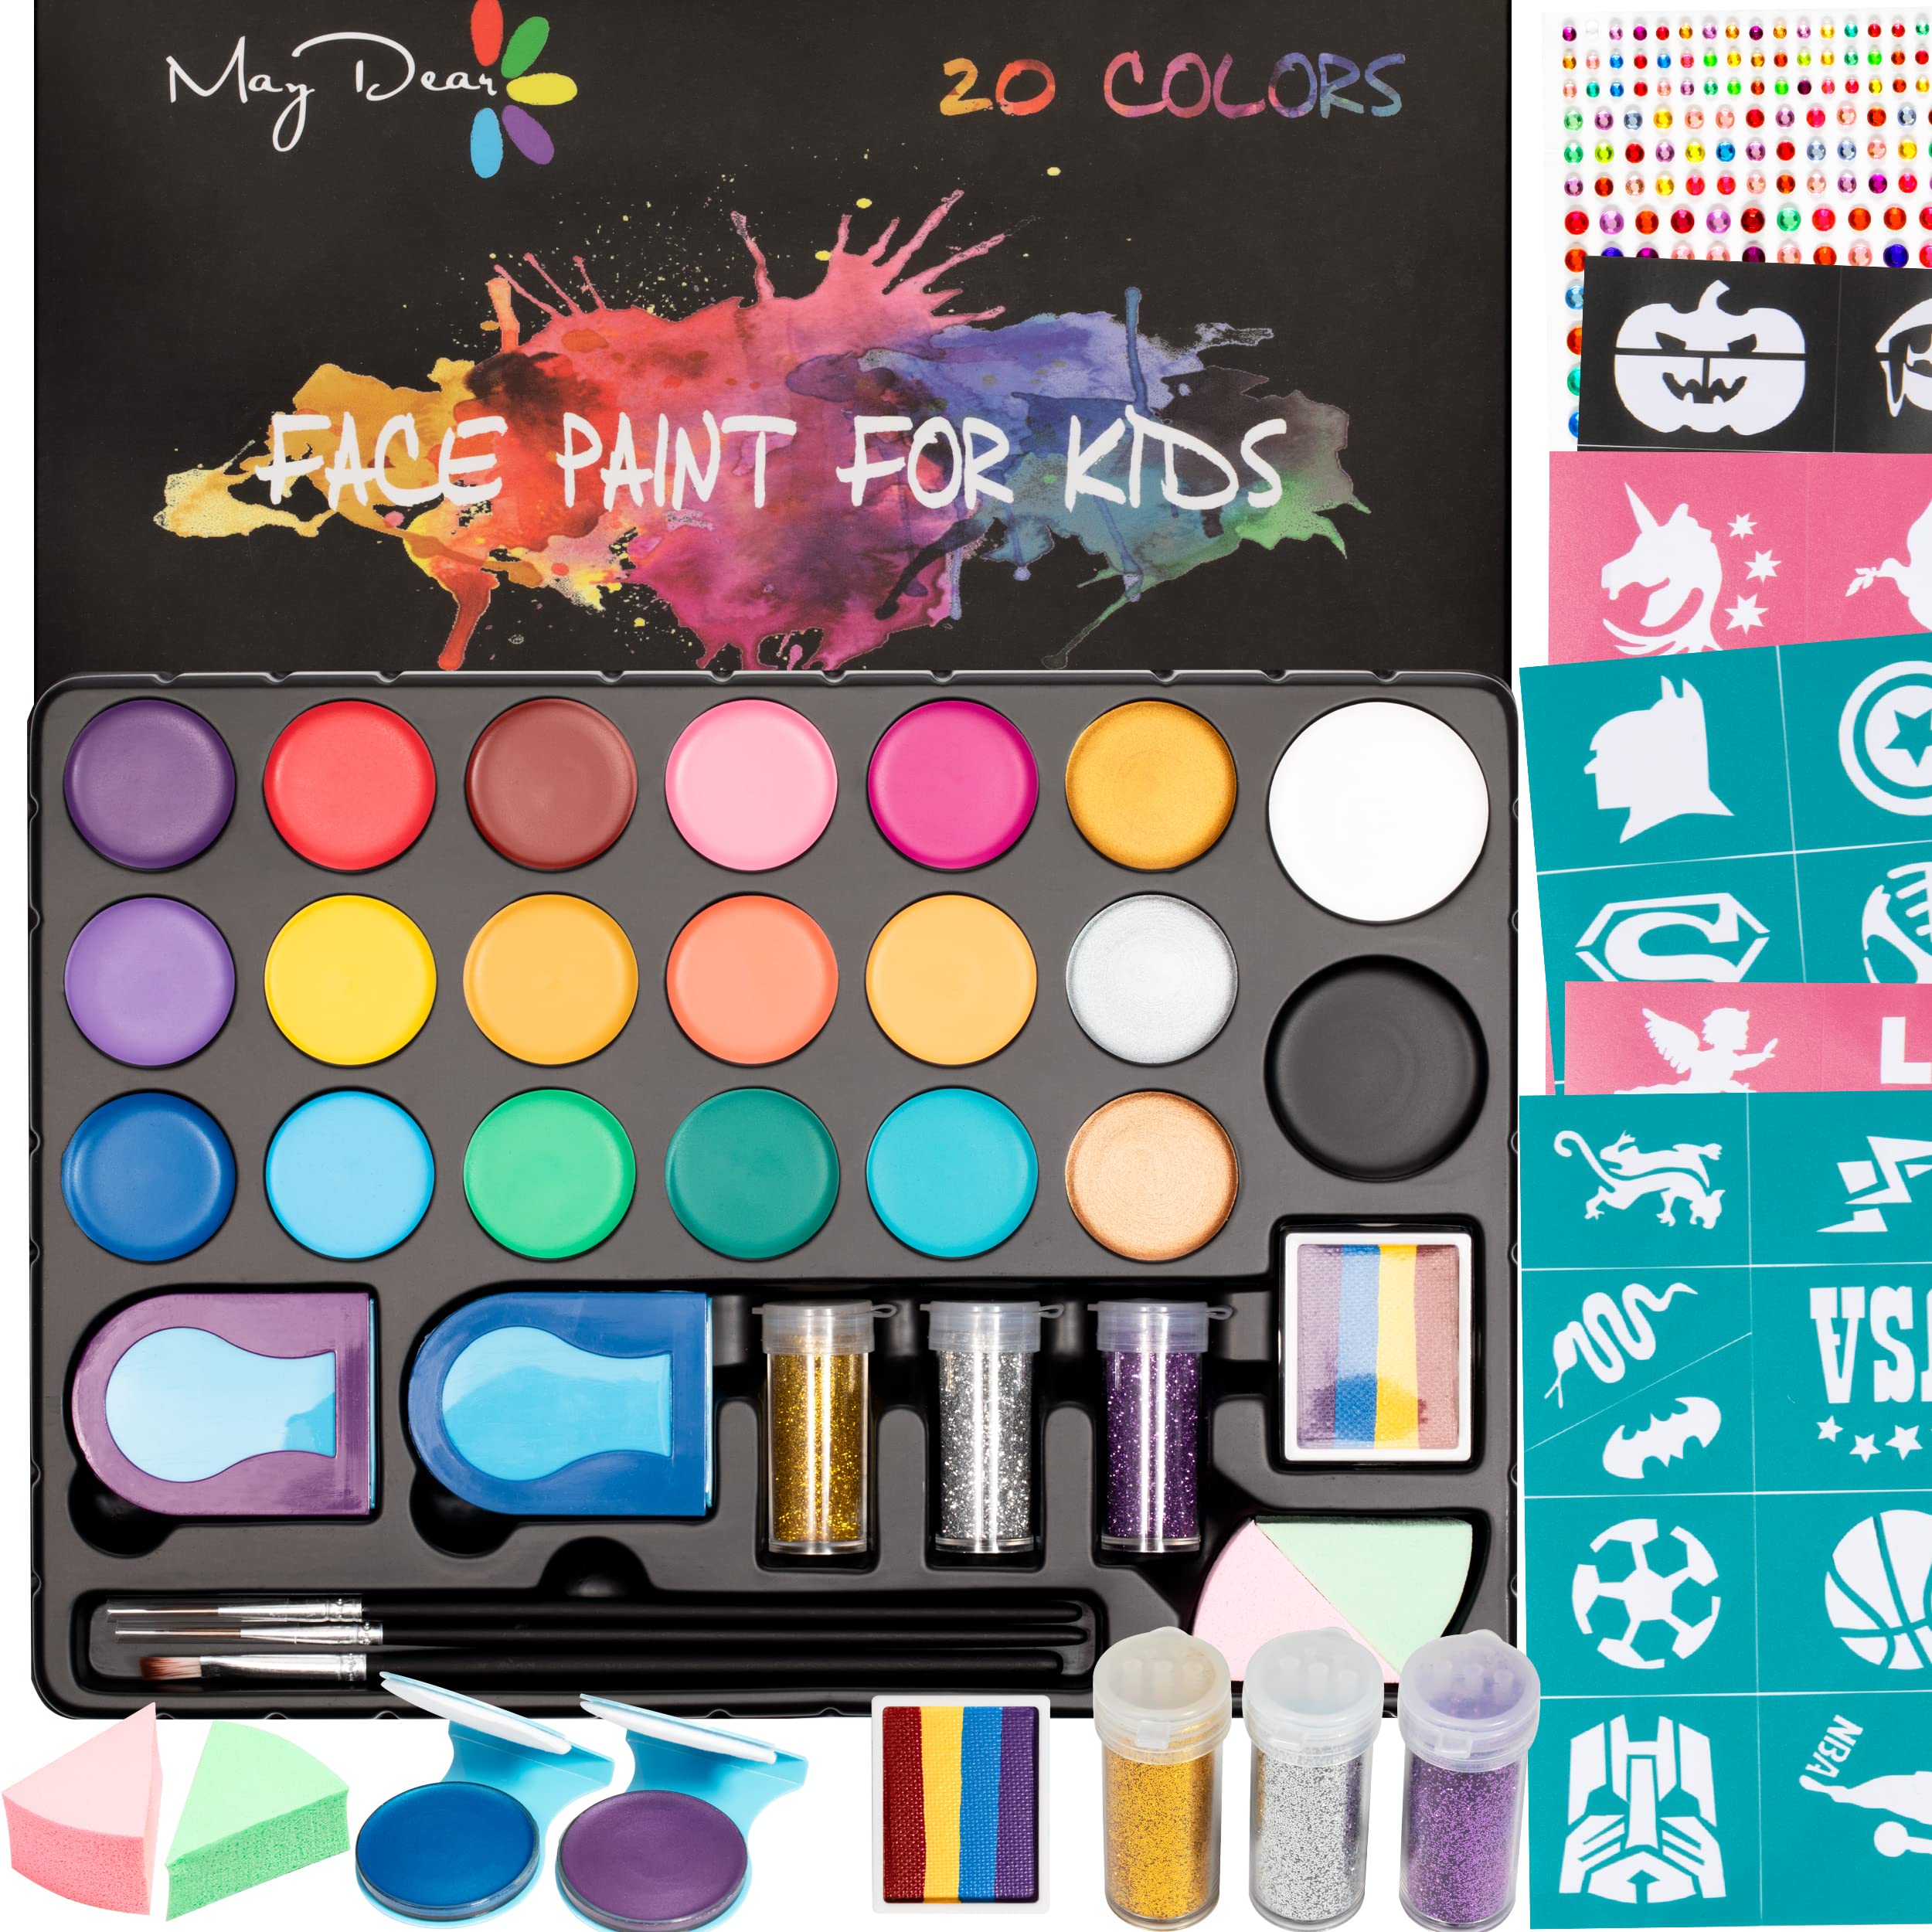 Maydear Face Painting Kit for Kids, Water Based Makeup Palette with  Stencils, Glitters, Rainbow Split Cake, Hair Dye Clips, for Parties,  Halloween